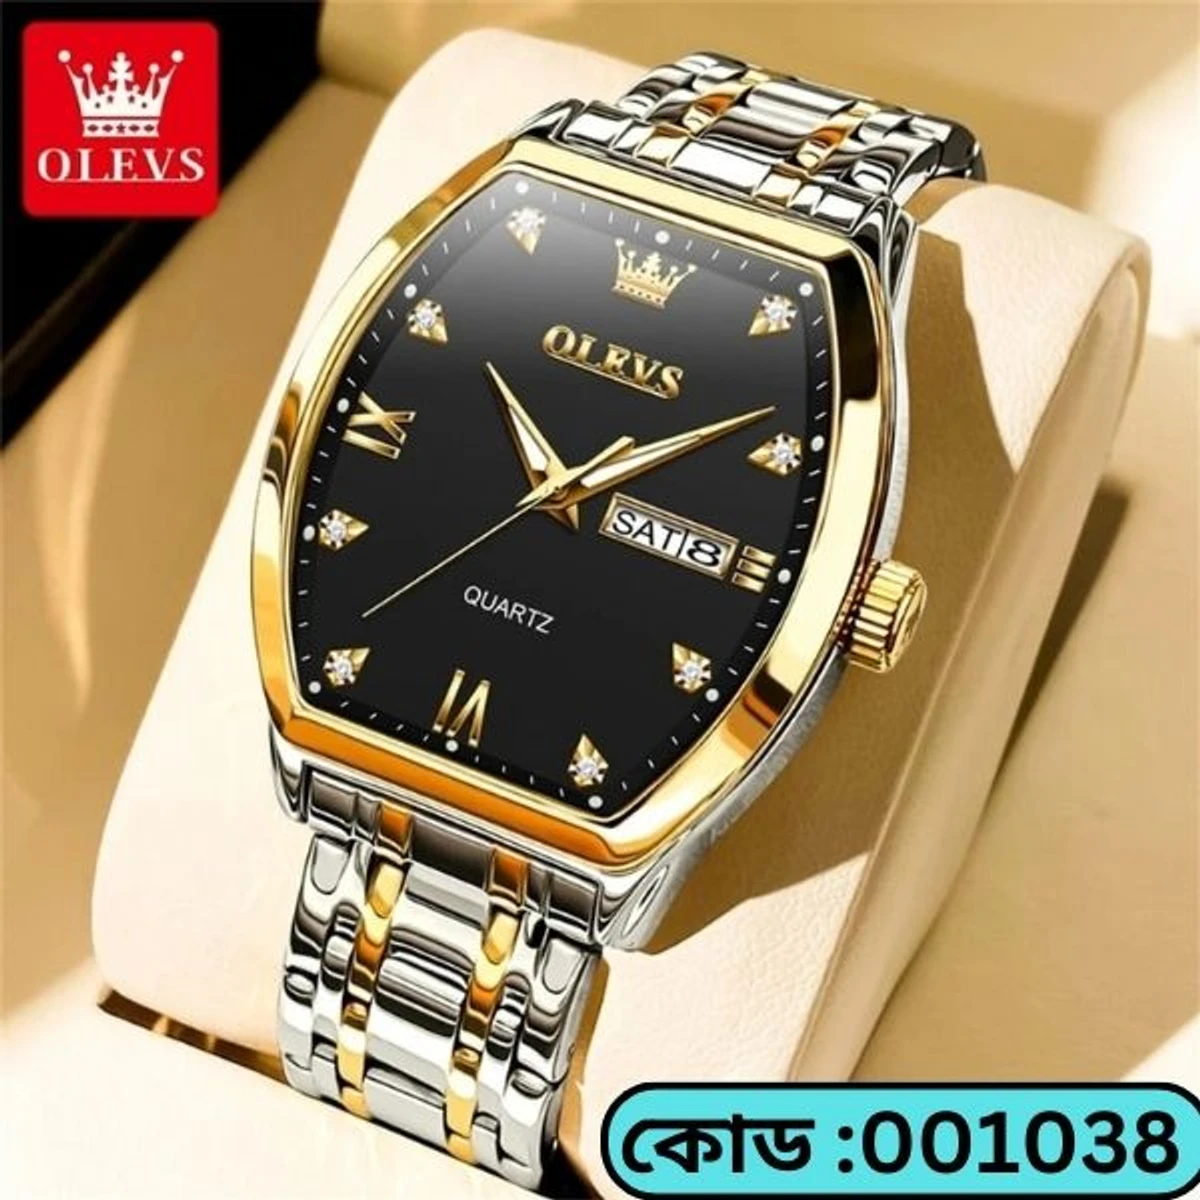 OLEVS MODEL 5528 Watch for Men Stainless Steel Watches - 5528 TOTON AR DIAL BLACK BORDER GOLDEN